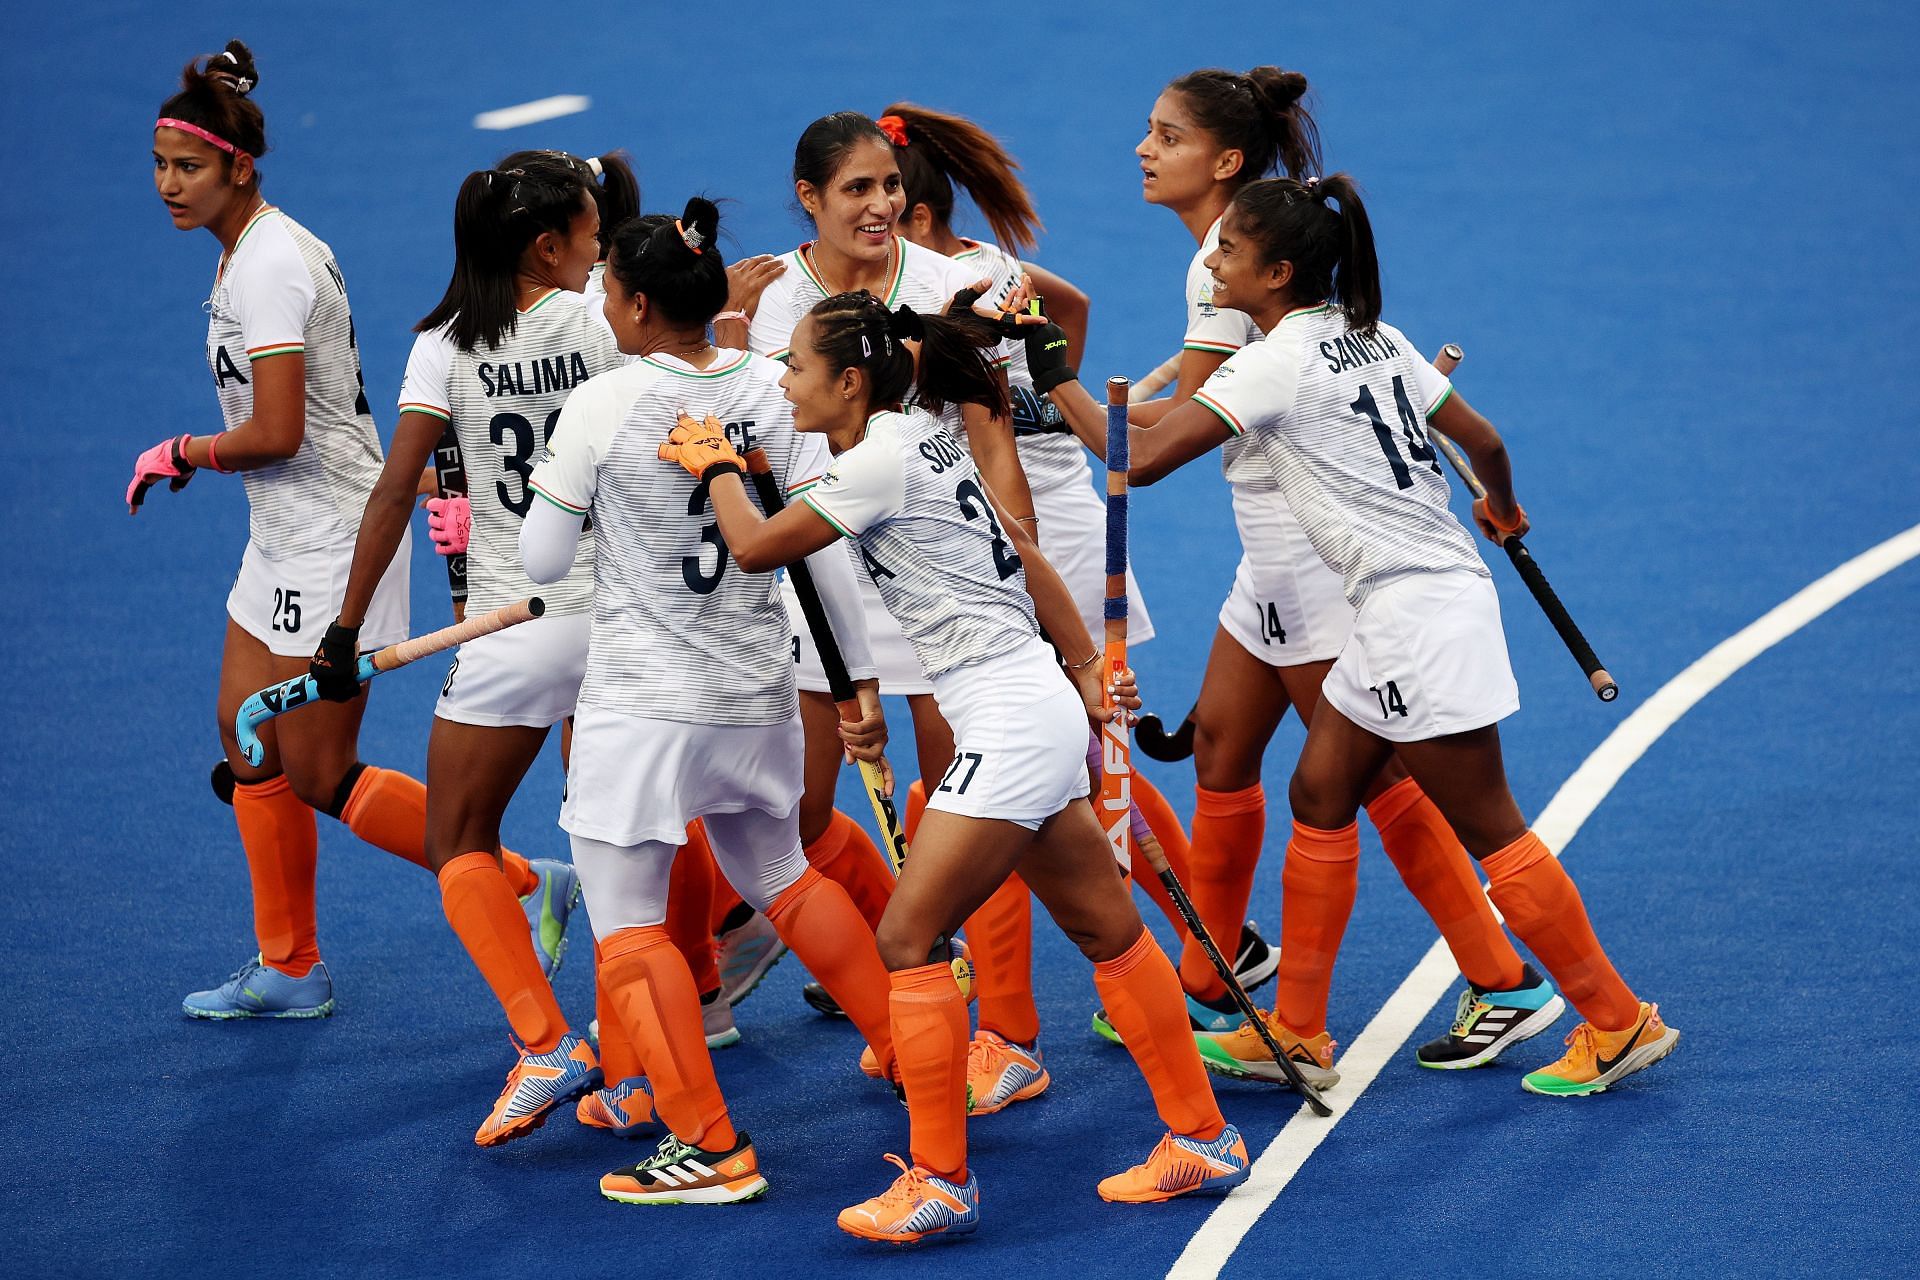 Hockey - Commonwealth Games: Day 2 (Image Courtesy: Getty)